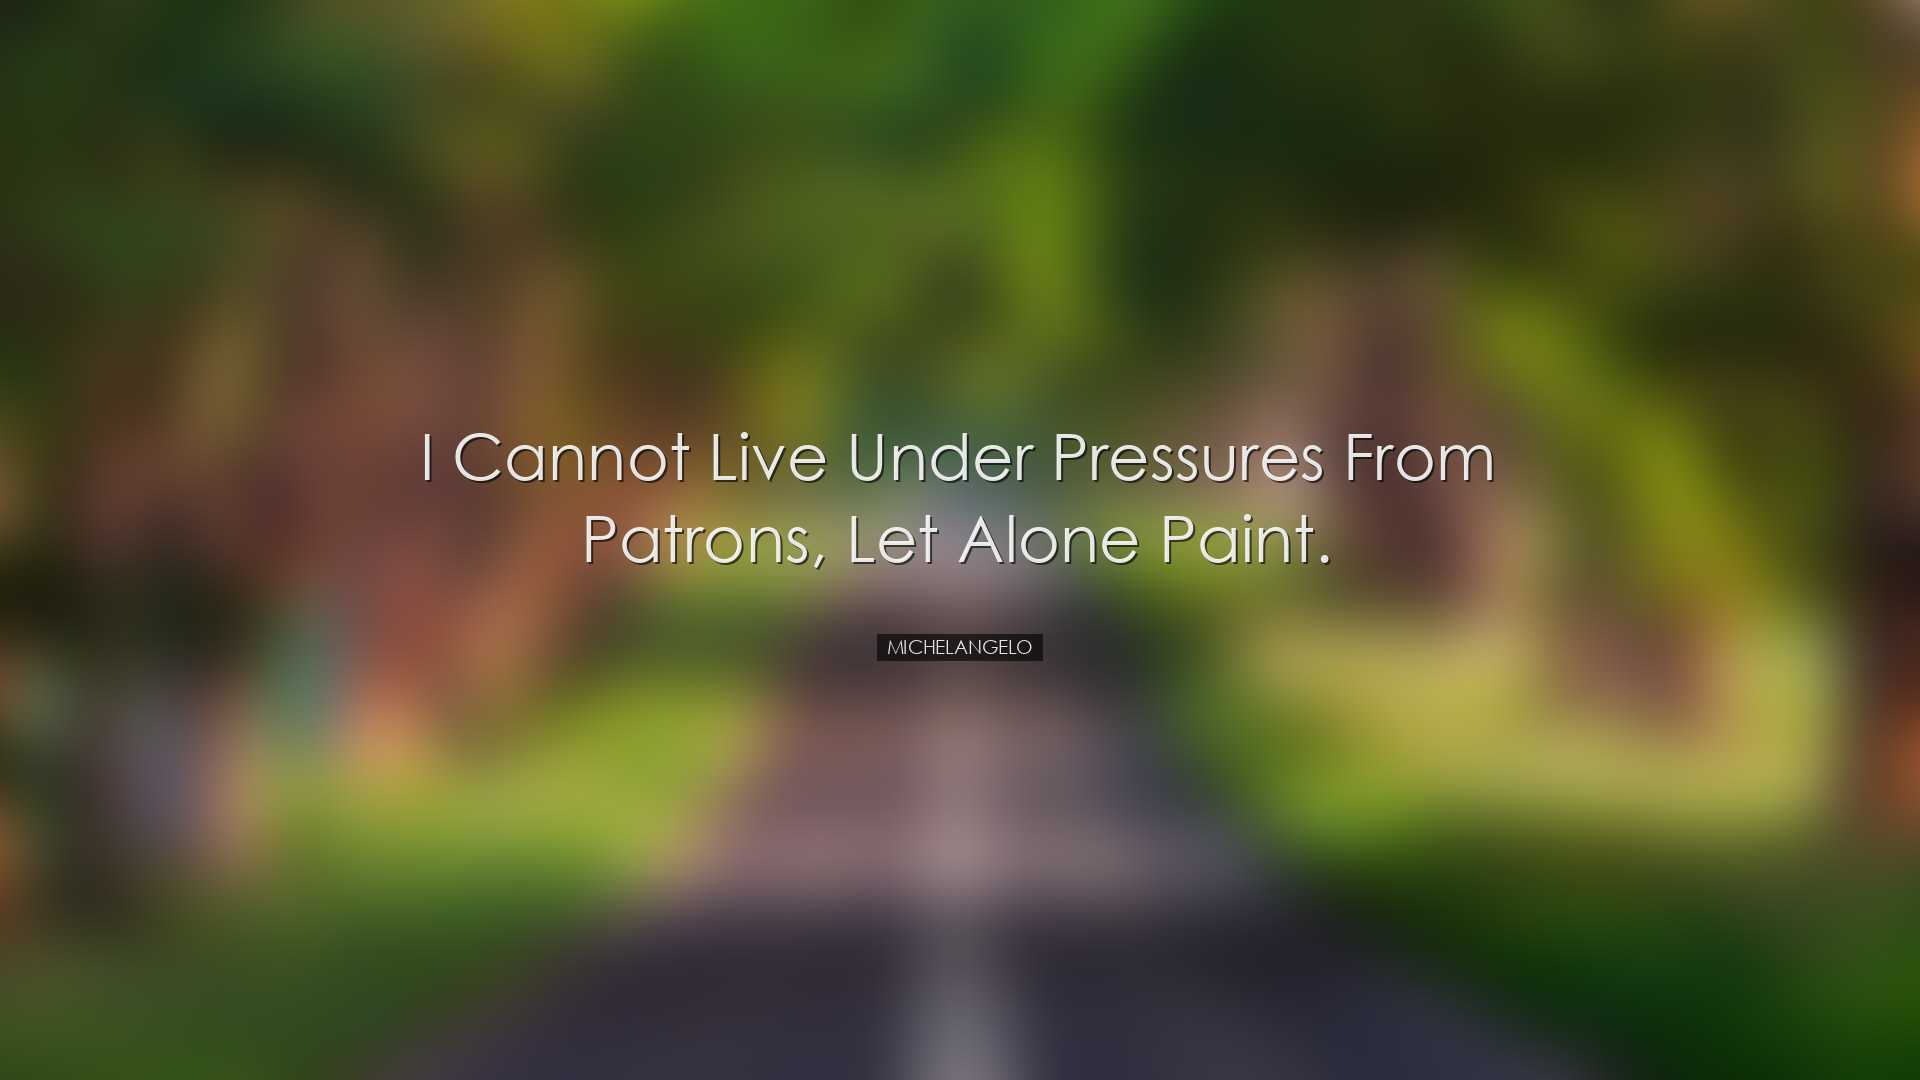 I cannot live under pressures from patrons, let alone paint. - Mic